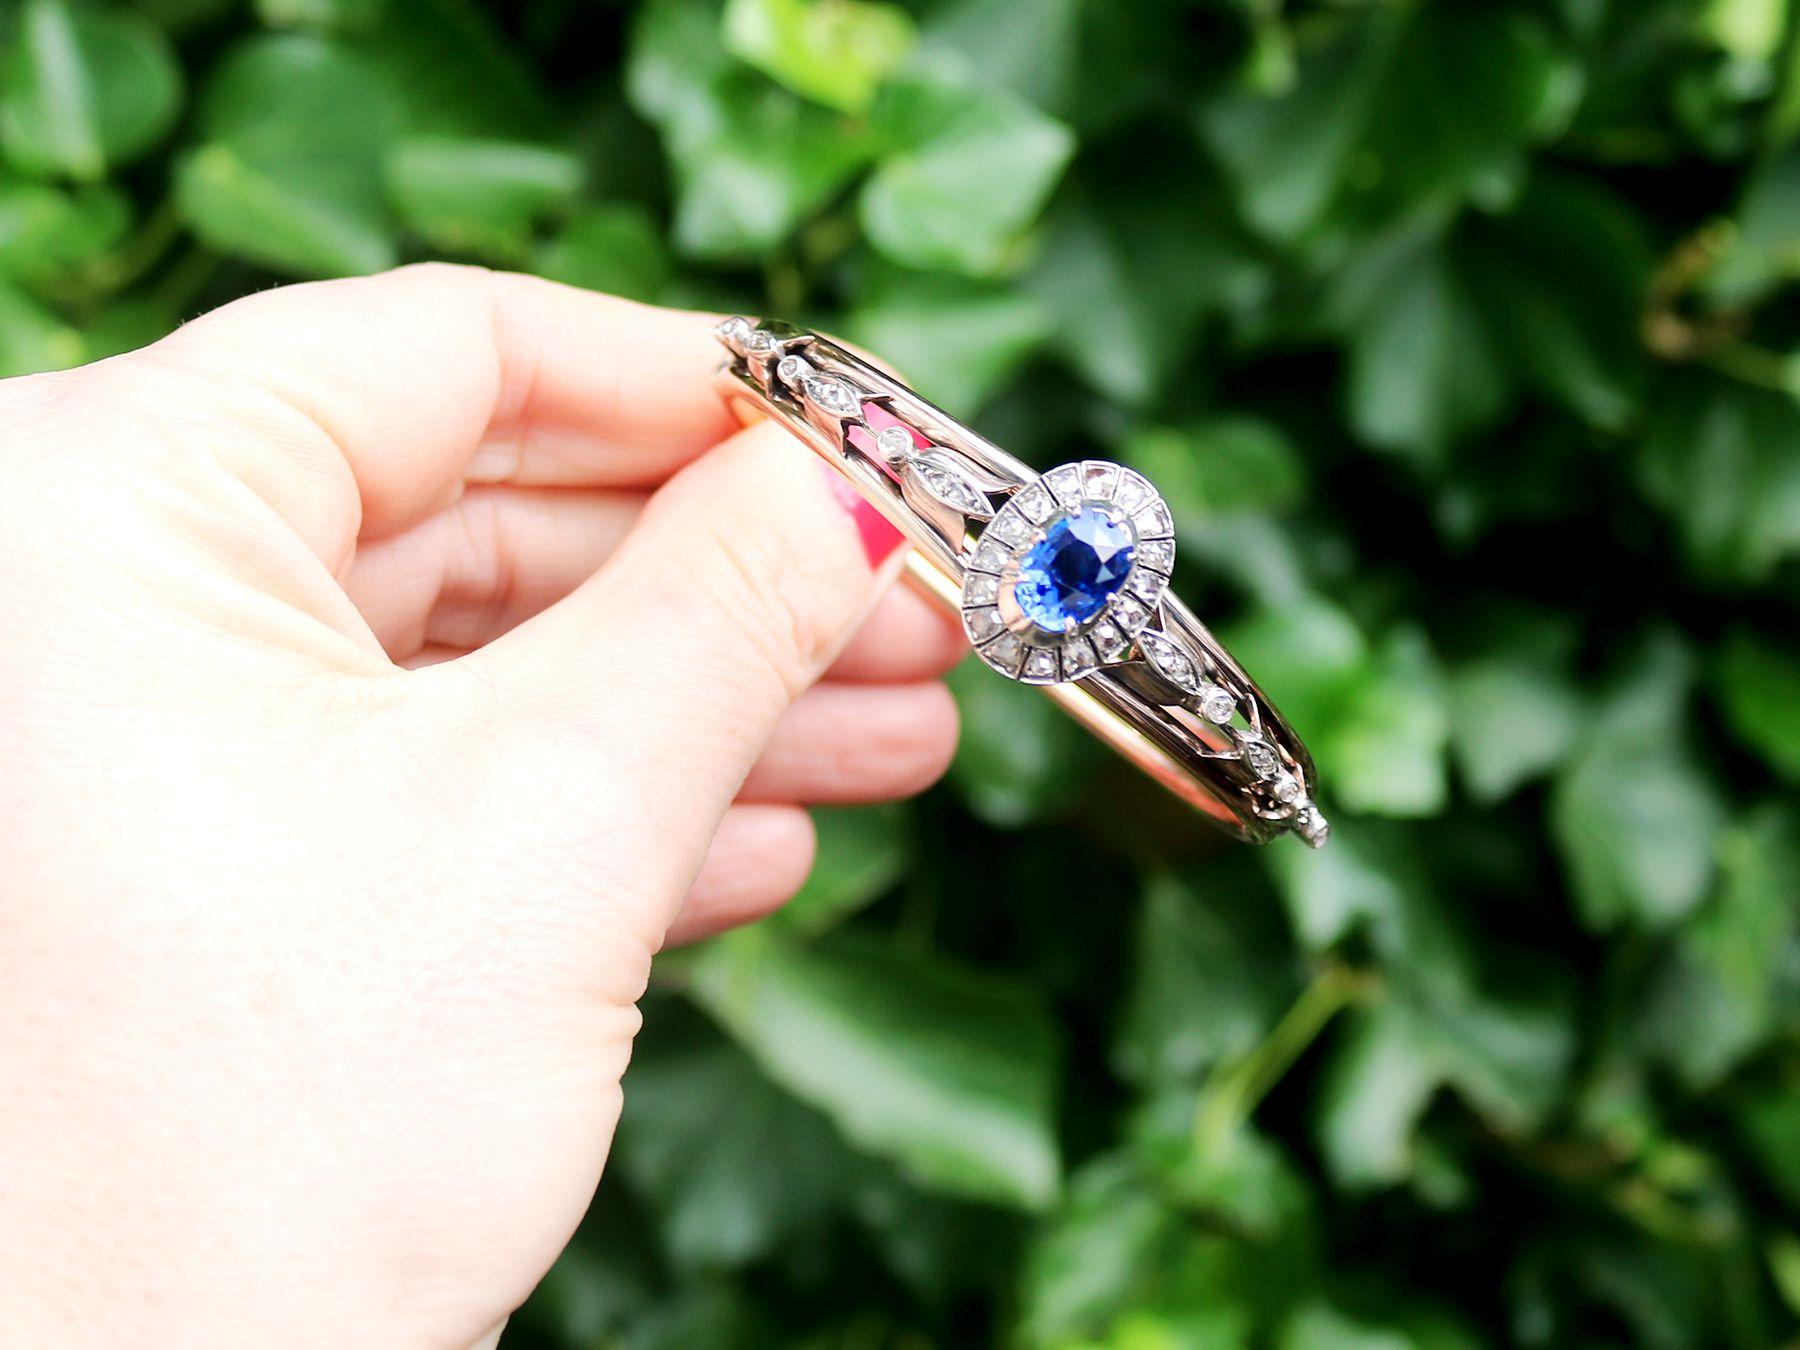 A stunning, fine and impressive Victorian 2.46 carat natural blue sapphire and 1.05 carat diamond, 14 karat rose gold and silver set bangle; part of our diverse antique jewelry and estate jewelry collections.

This stunning, fine and impressive